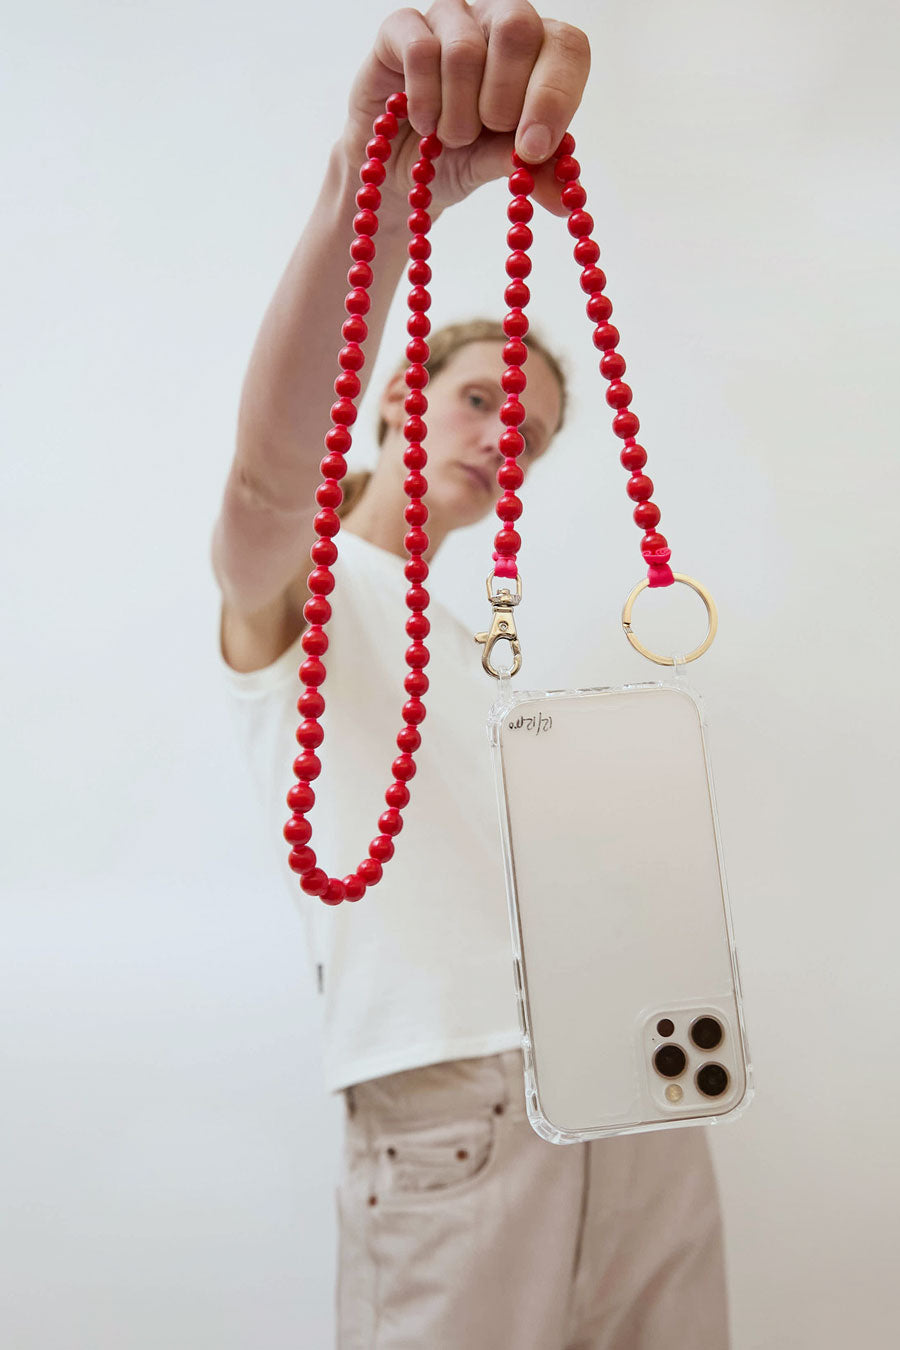 Ina Seifart Handykette Iphone Necklace in Red with Red Thread